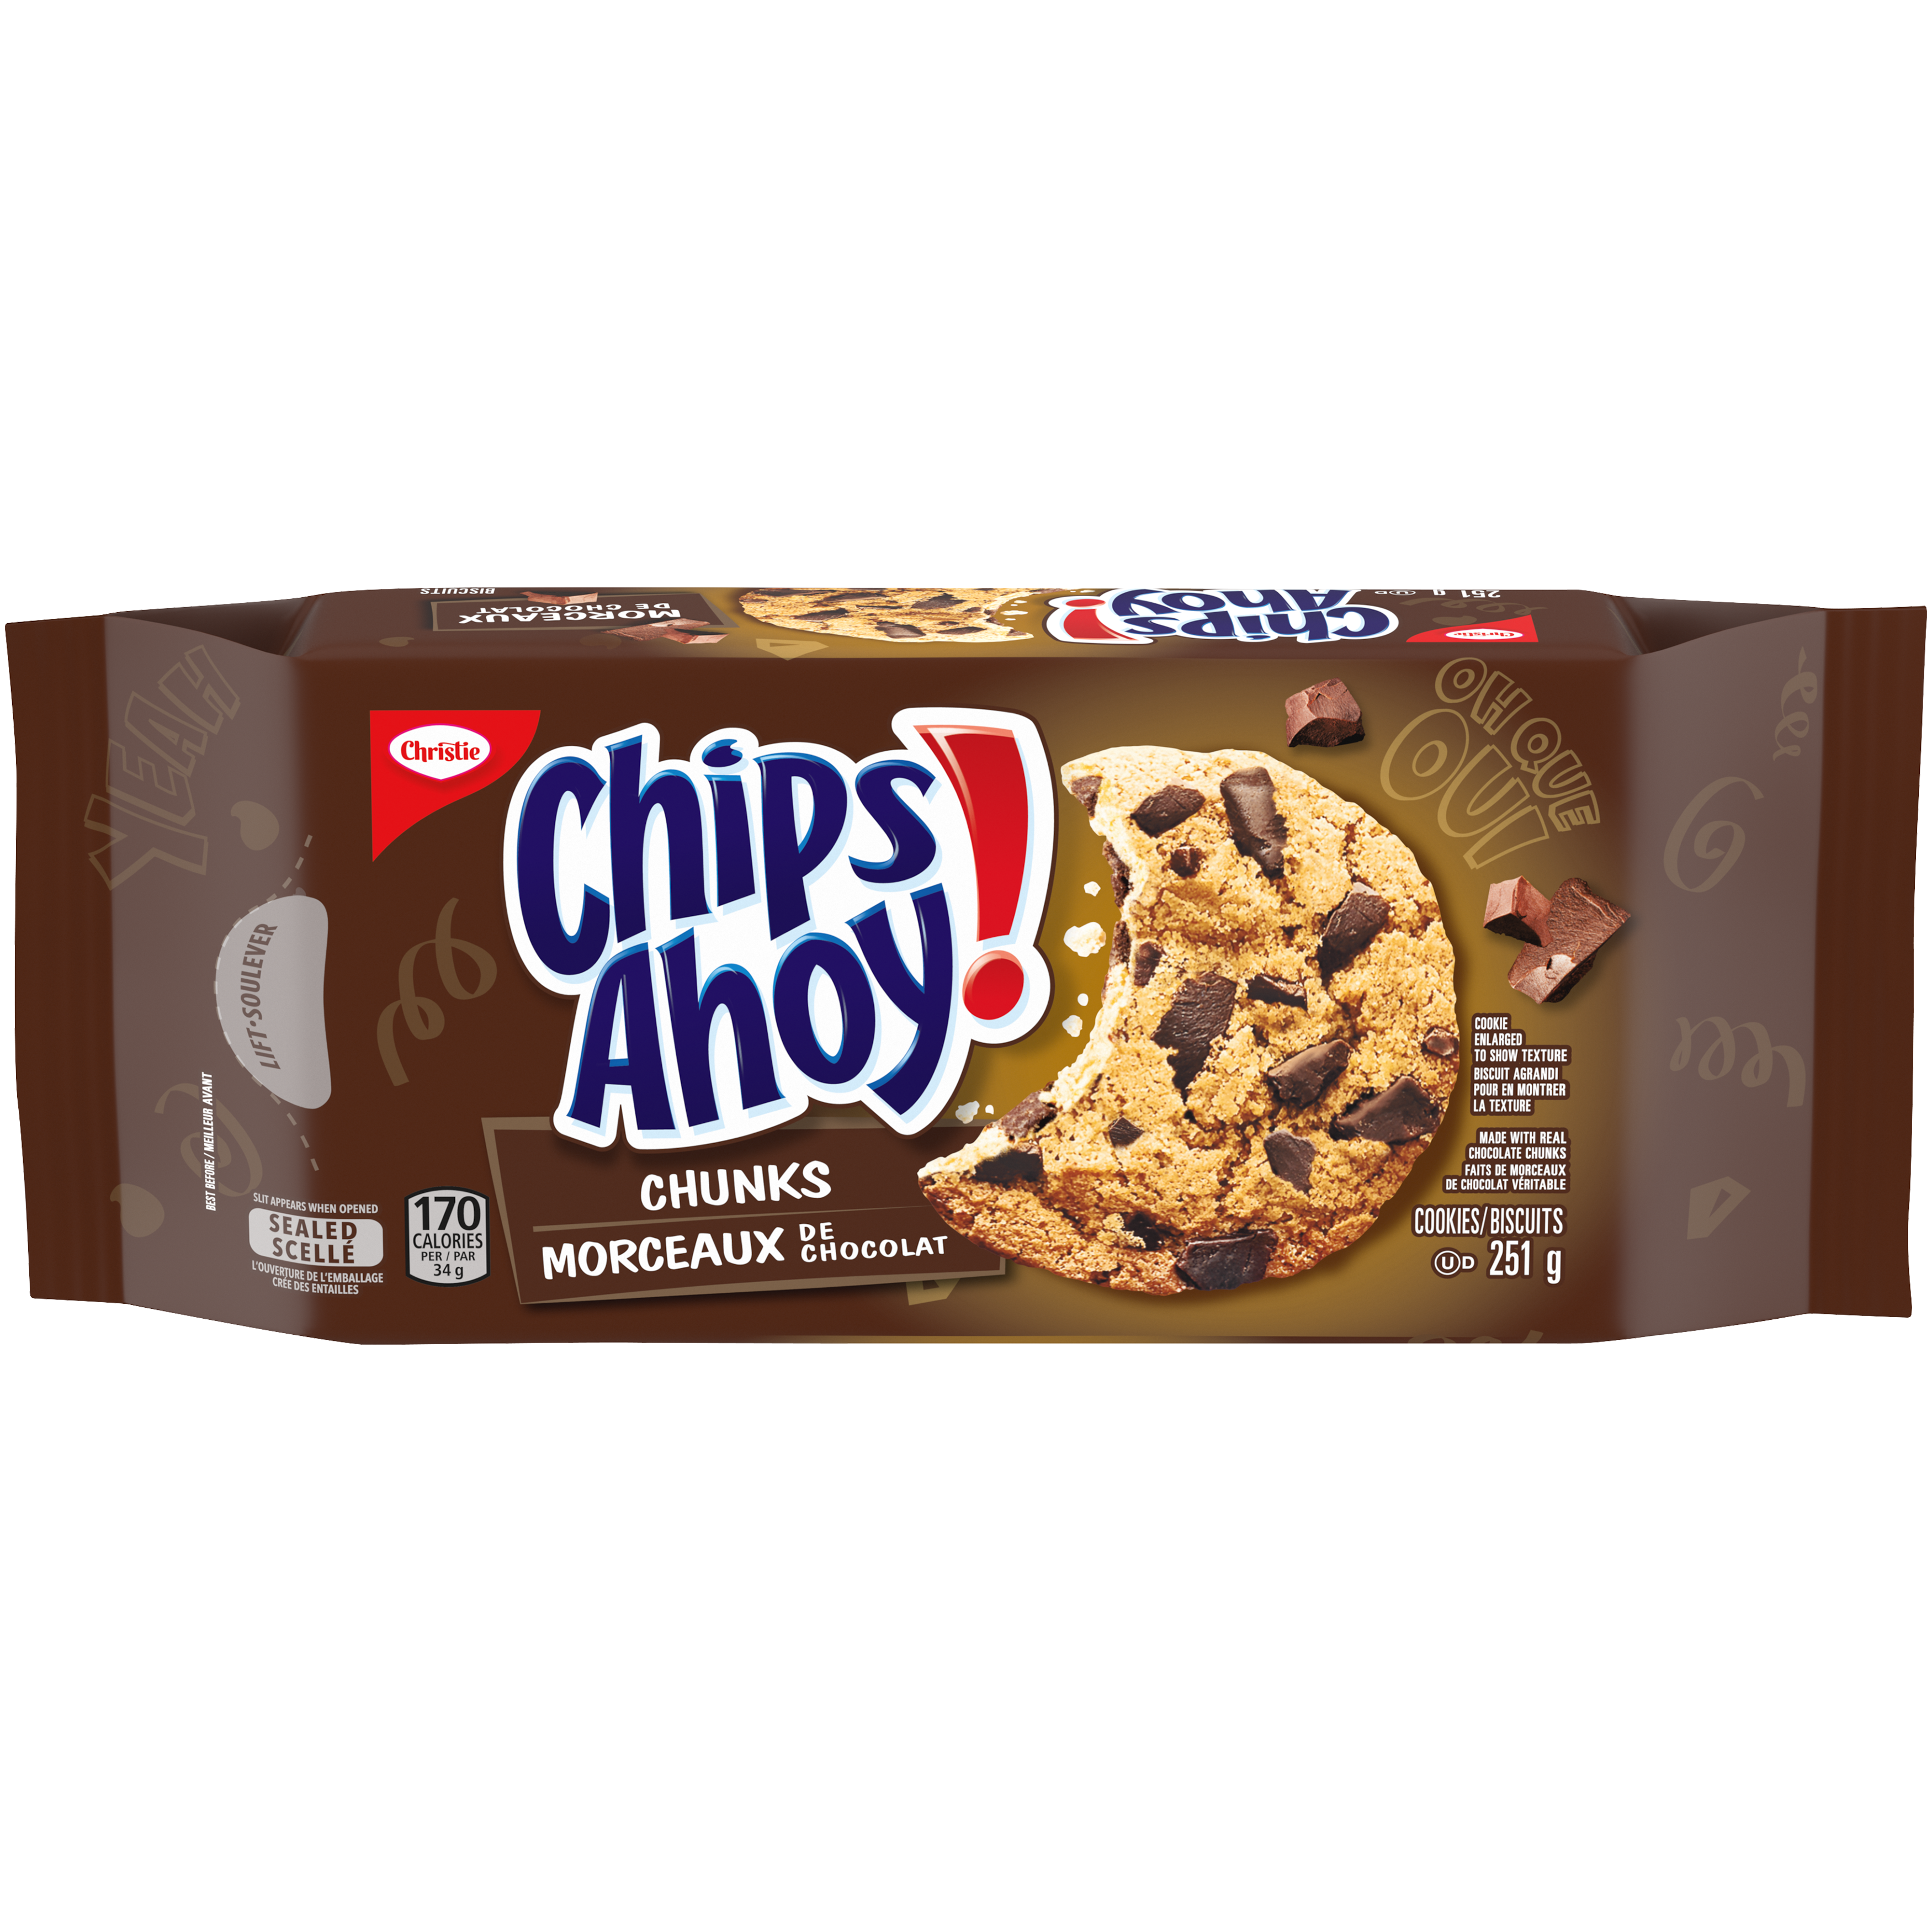 CHIPS AHOY! Chunks Chocolate Chip Cookies 251g-3